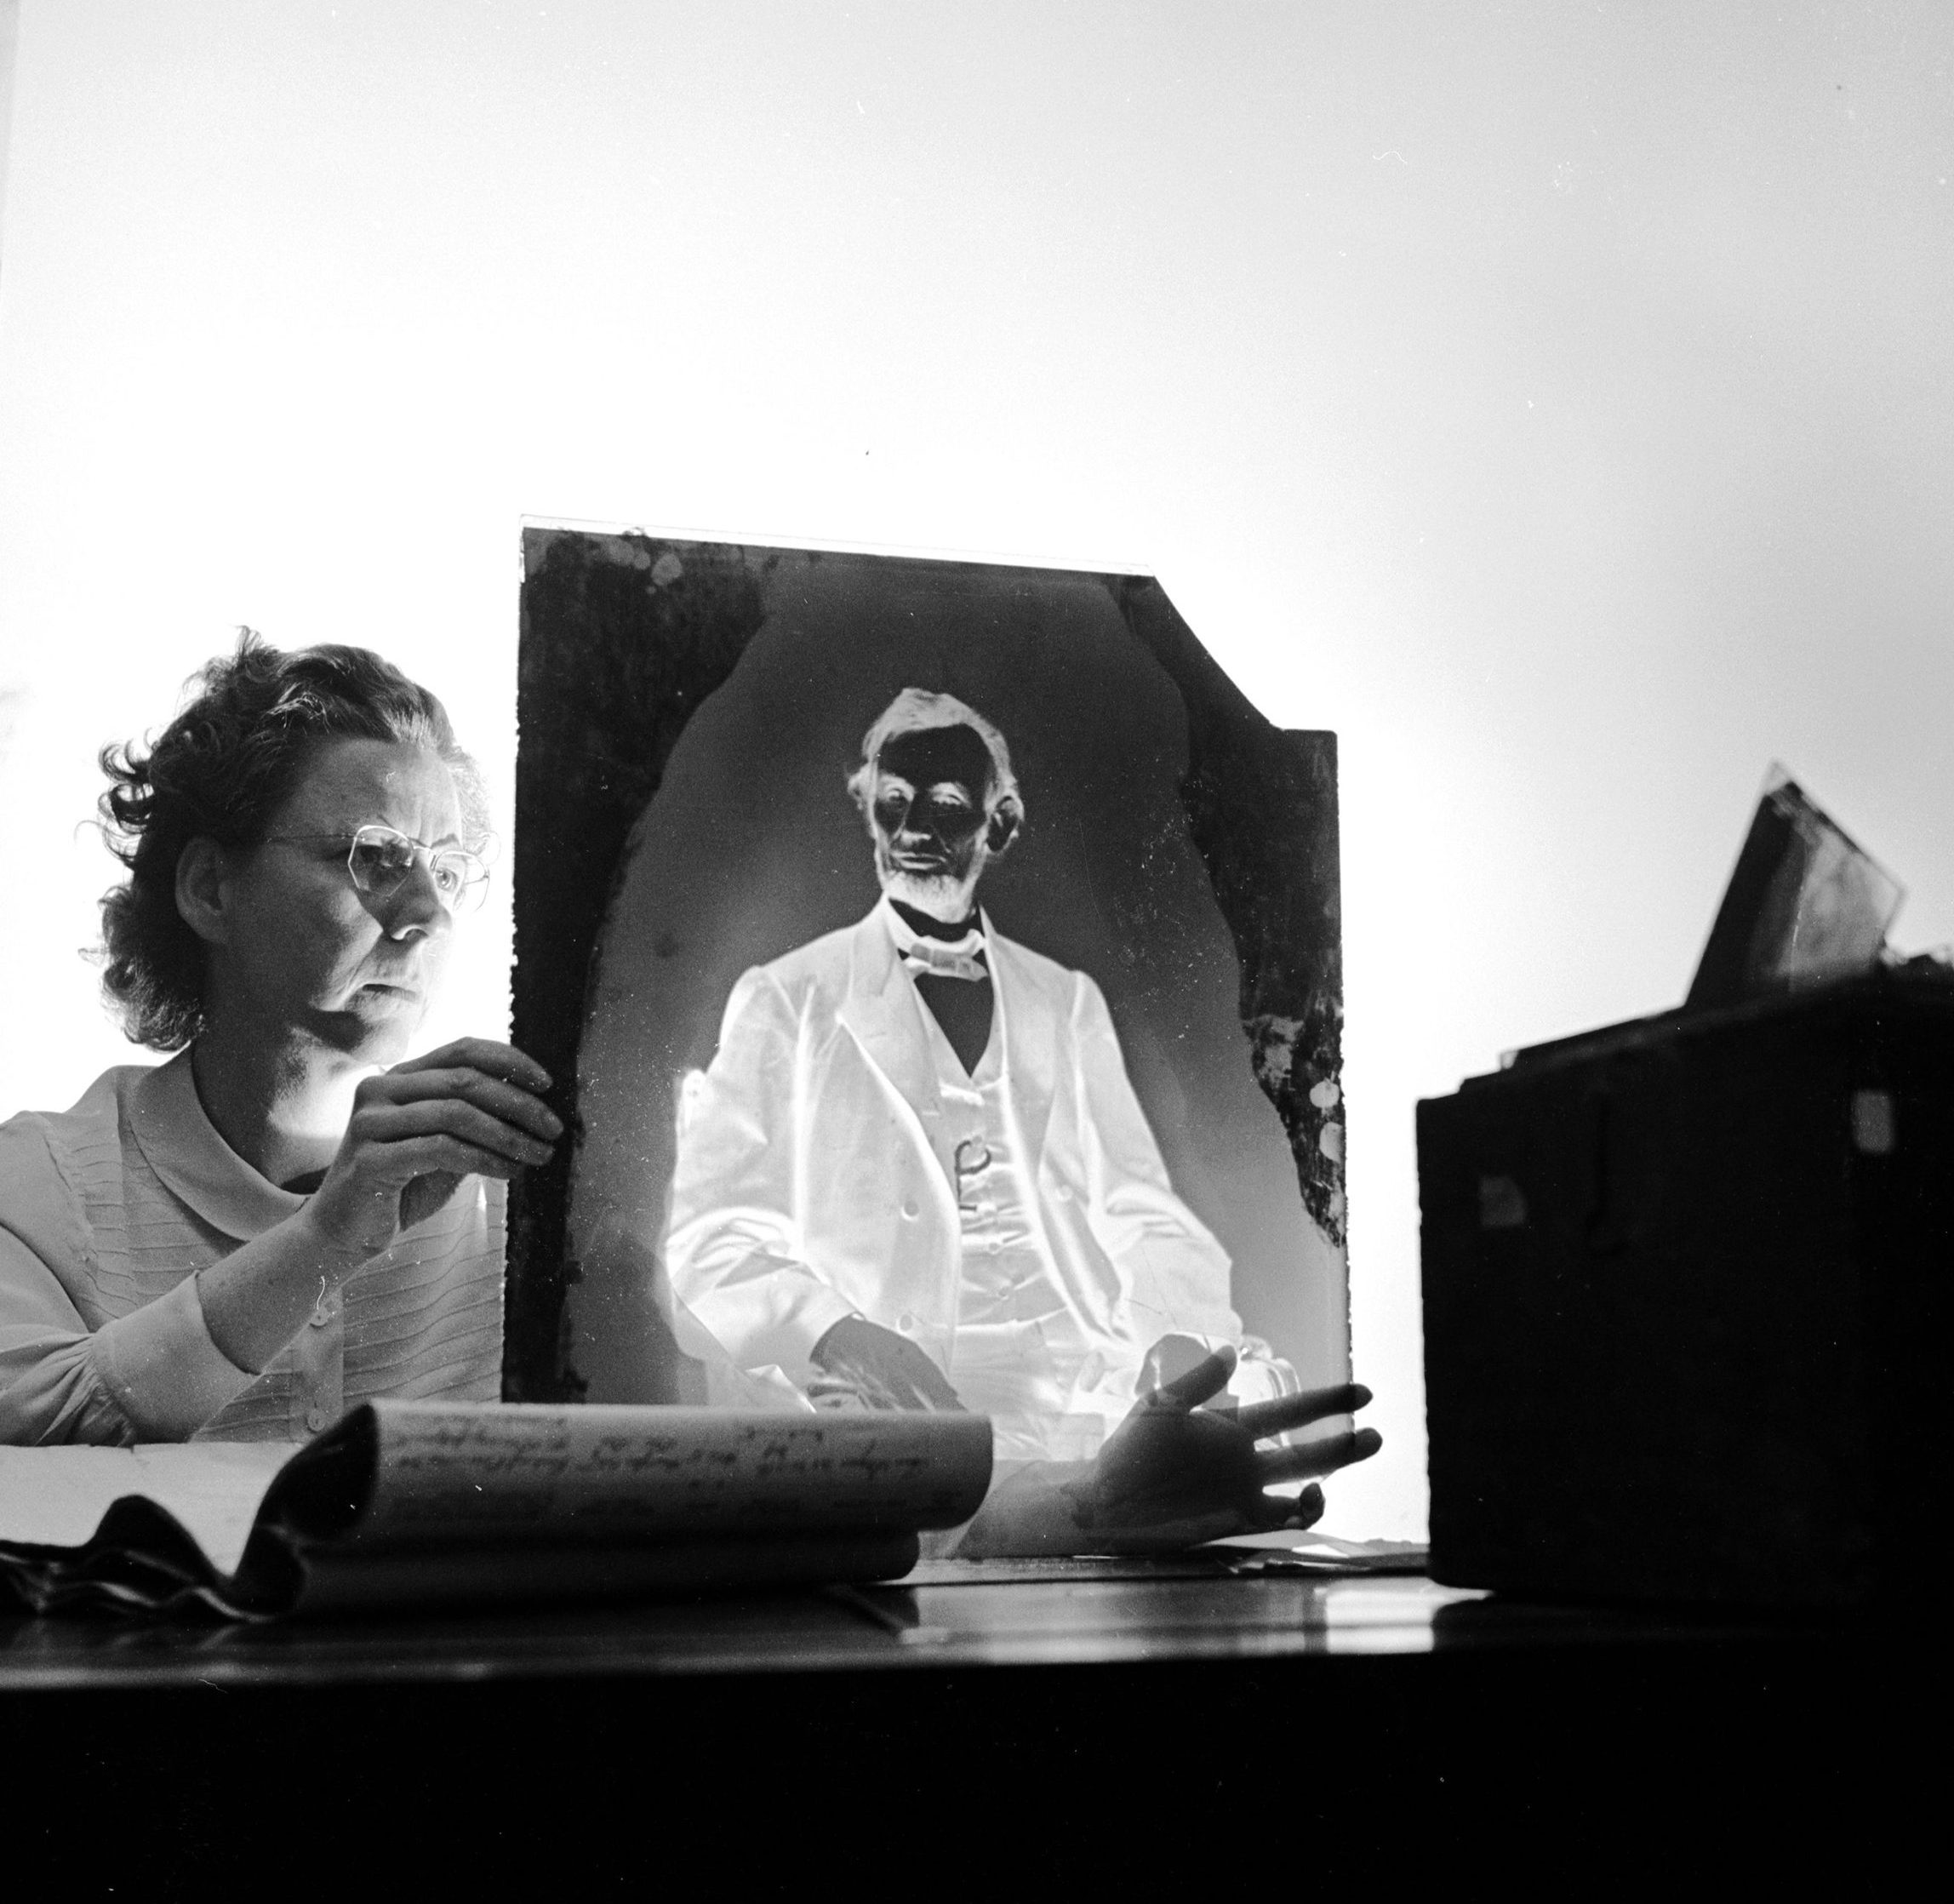 A researcher holding one of America's most priceless negatives, the glass plate made by famous civil war photographer Mathew Brady of Abraham Lincoln in 1865 just before the 16th President of the United States was assassinated. It is stored in the National Archives in Washington. (Three Lions/Getty Images)